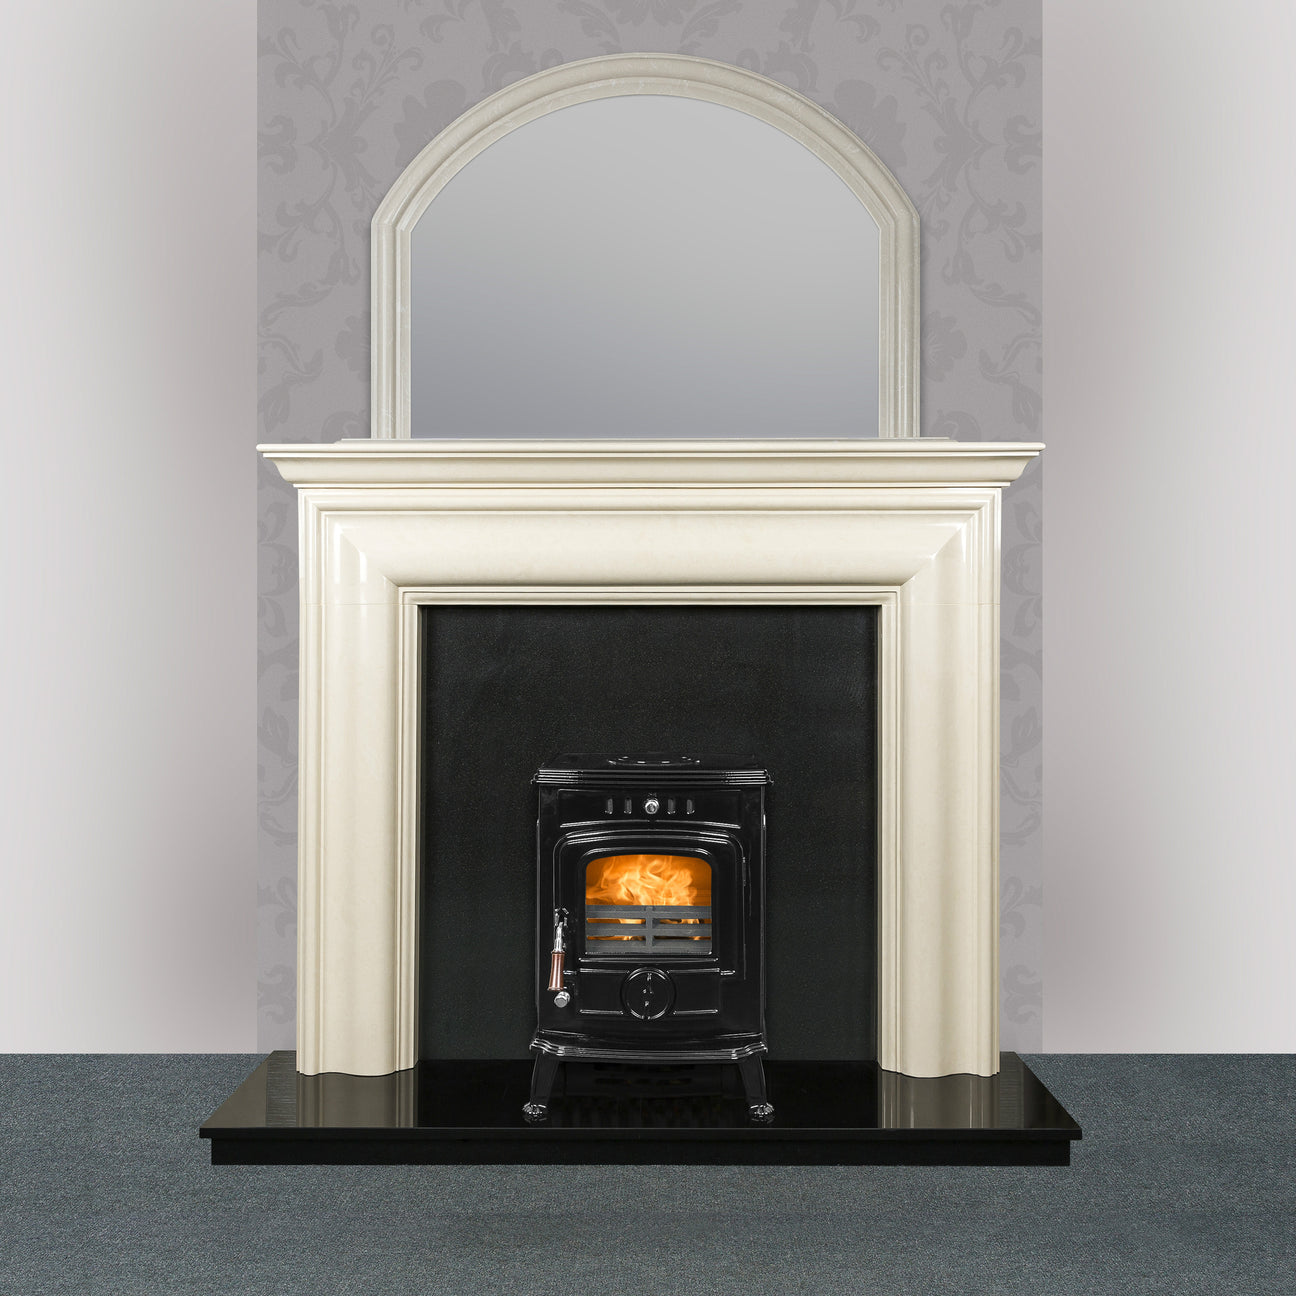 Image of Robin 5 kW Free Standing Stove with a marble fireplace